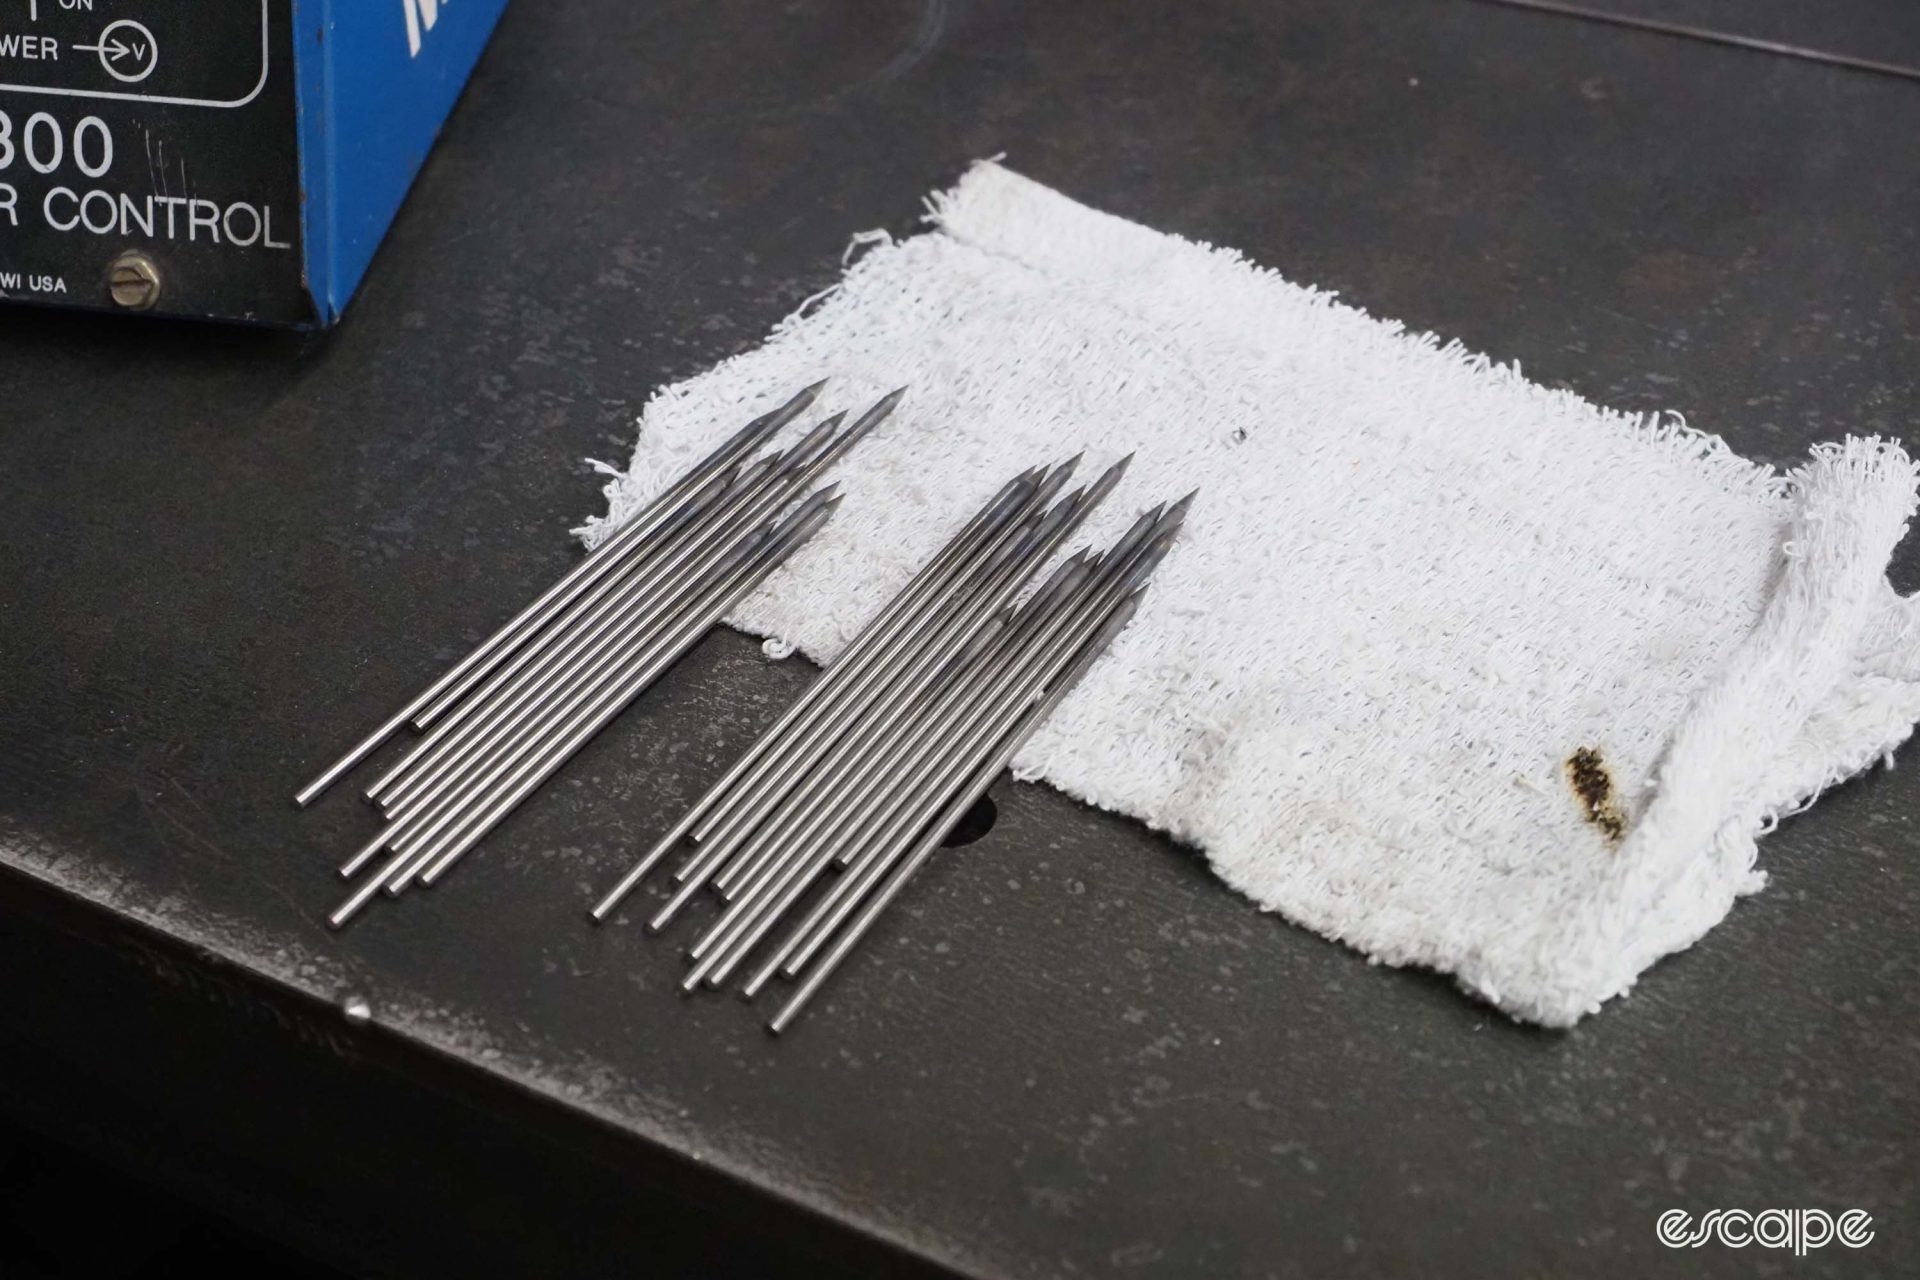 Two piles of tungsten electrode rods sit on a rag on a bench.